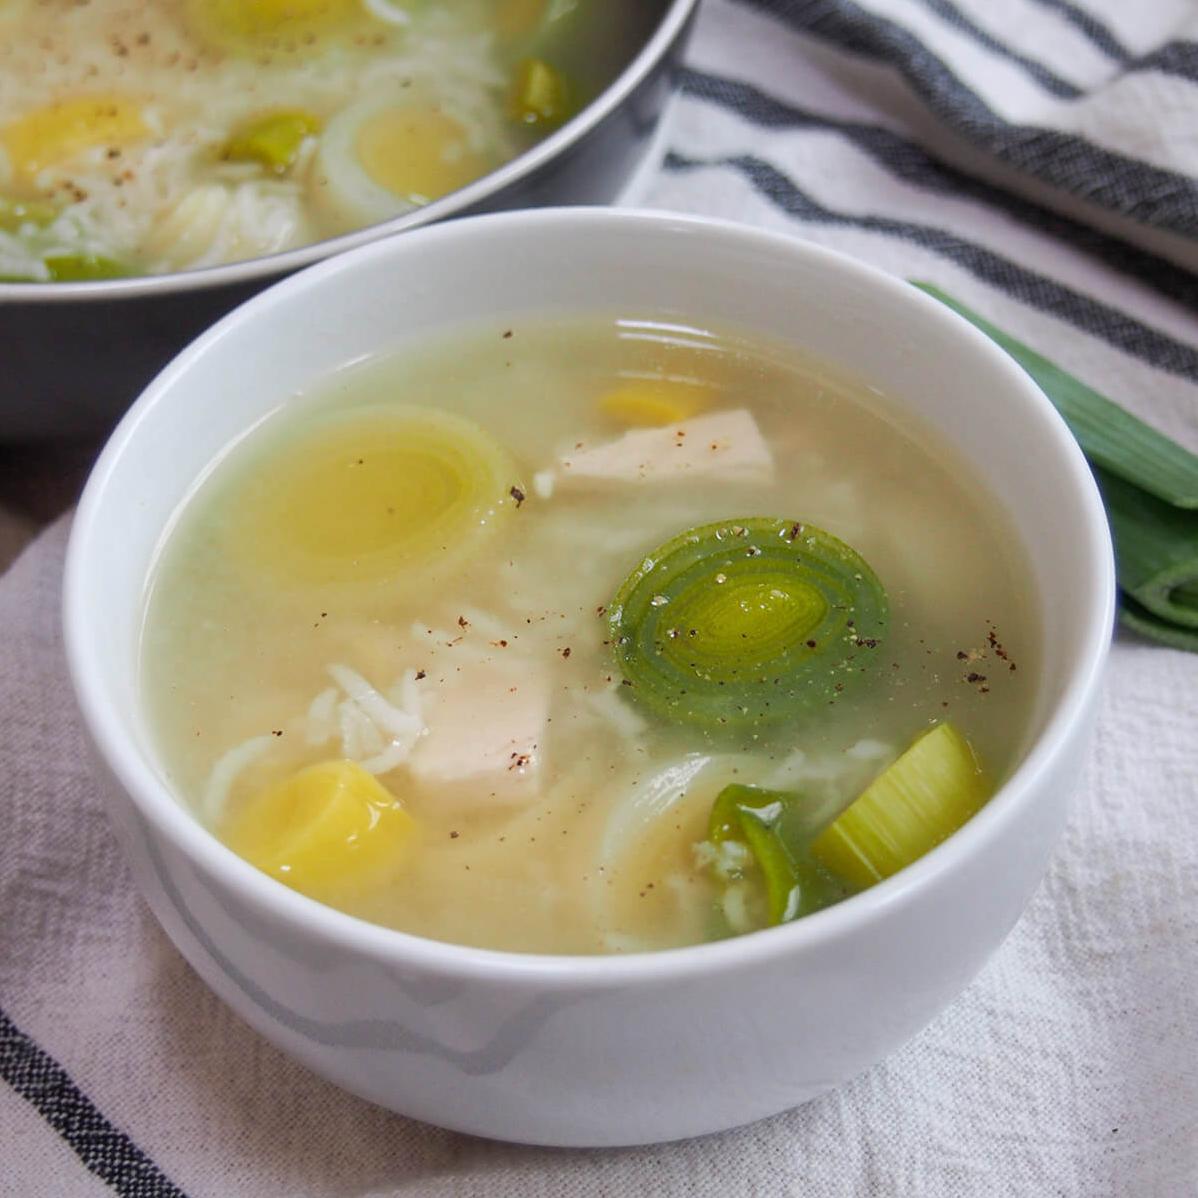  This soup is sure to warm you from the inside out